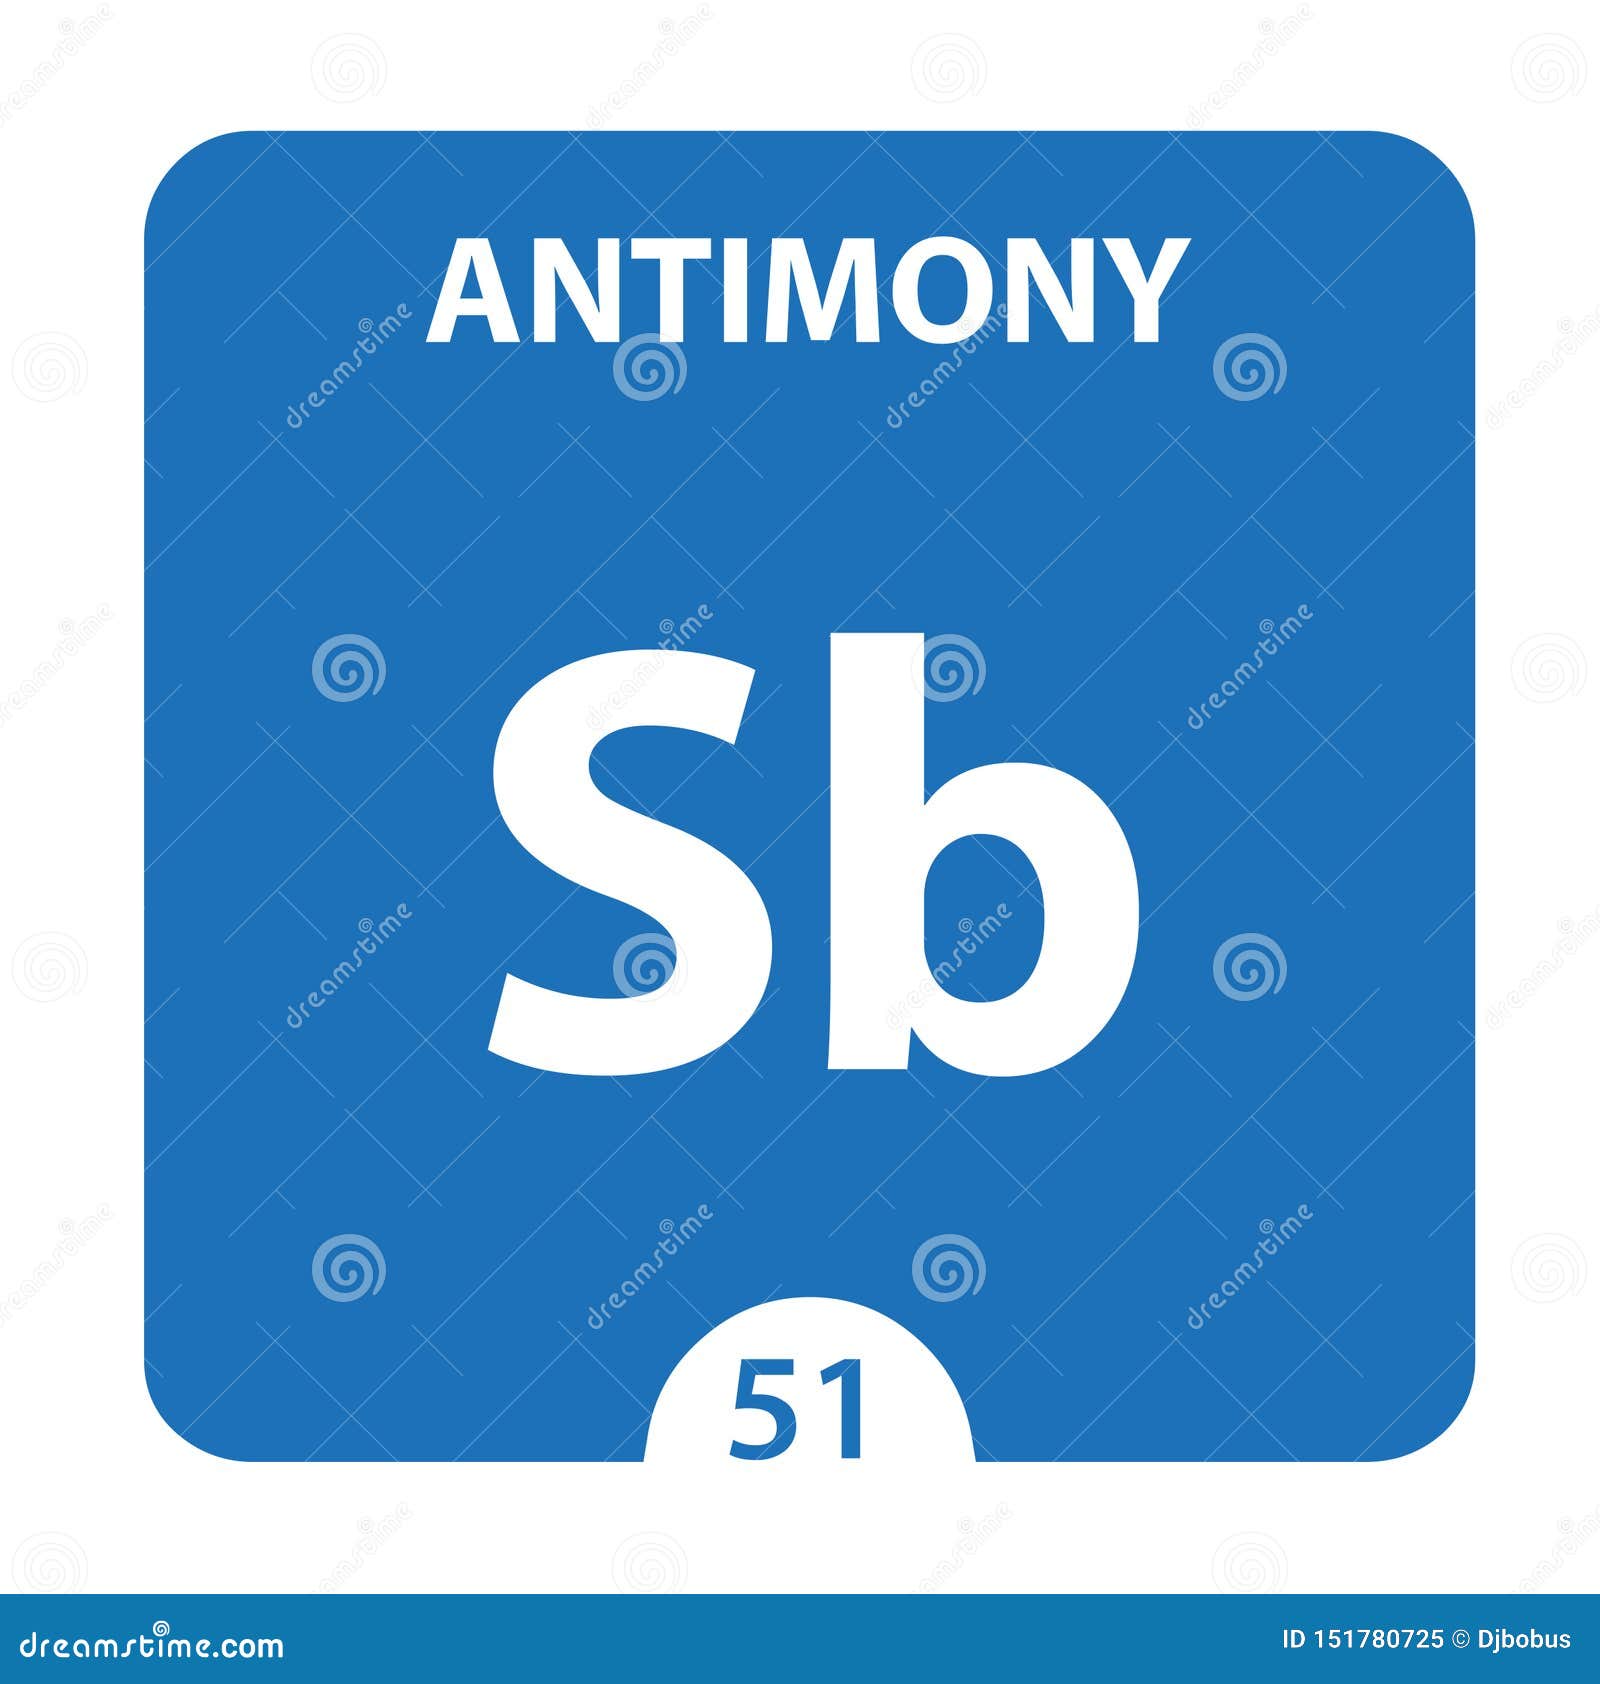 Antimony Sb Chemical Element Antimony Sign With Atomic Number Chemical 51 Element Of Periodic Table Periodic Table Of The Stock Illustration Illustration Of Number